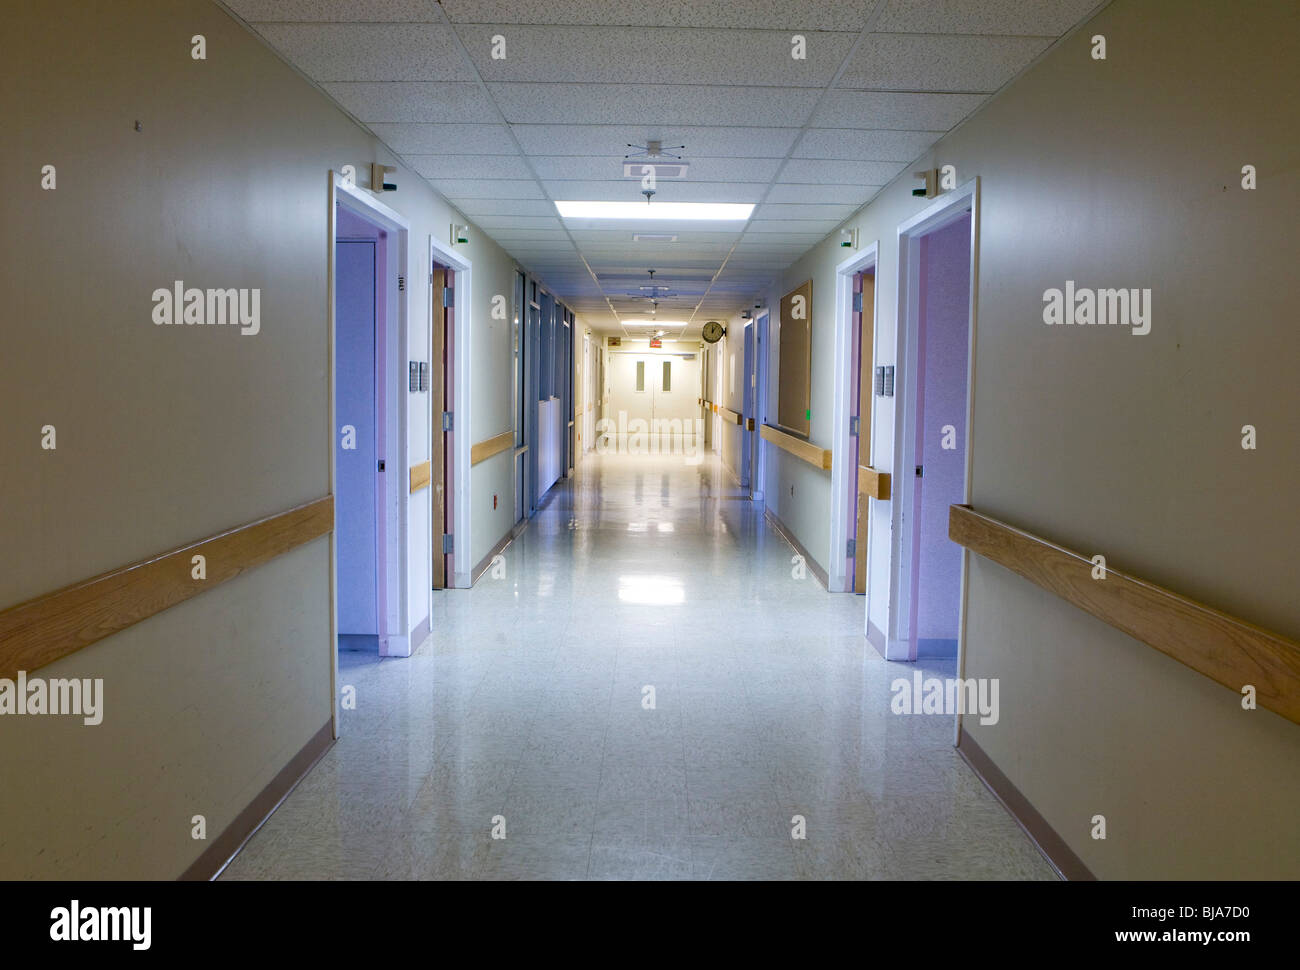 A recently closed hospital in the USA with signage and medical equipment. Stock Photo